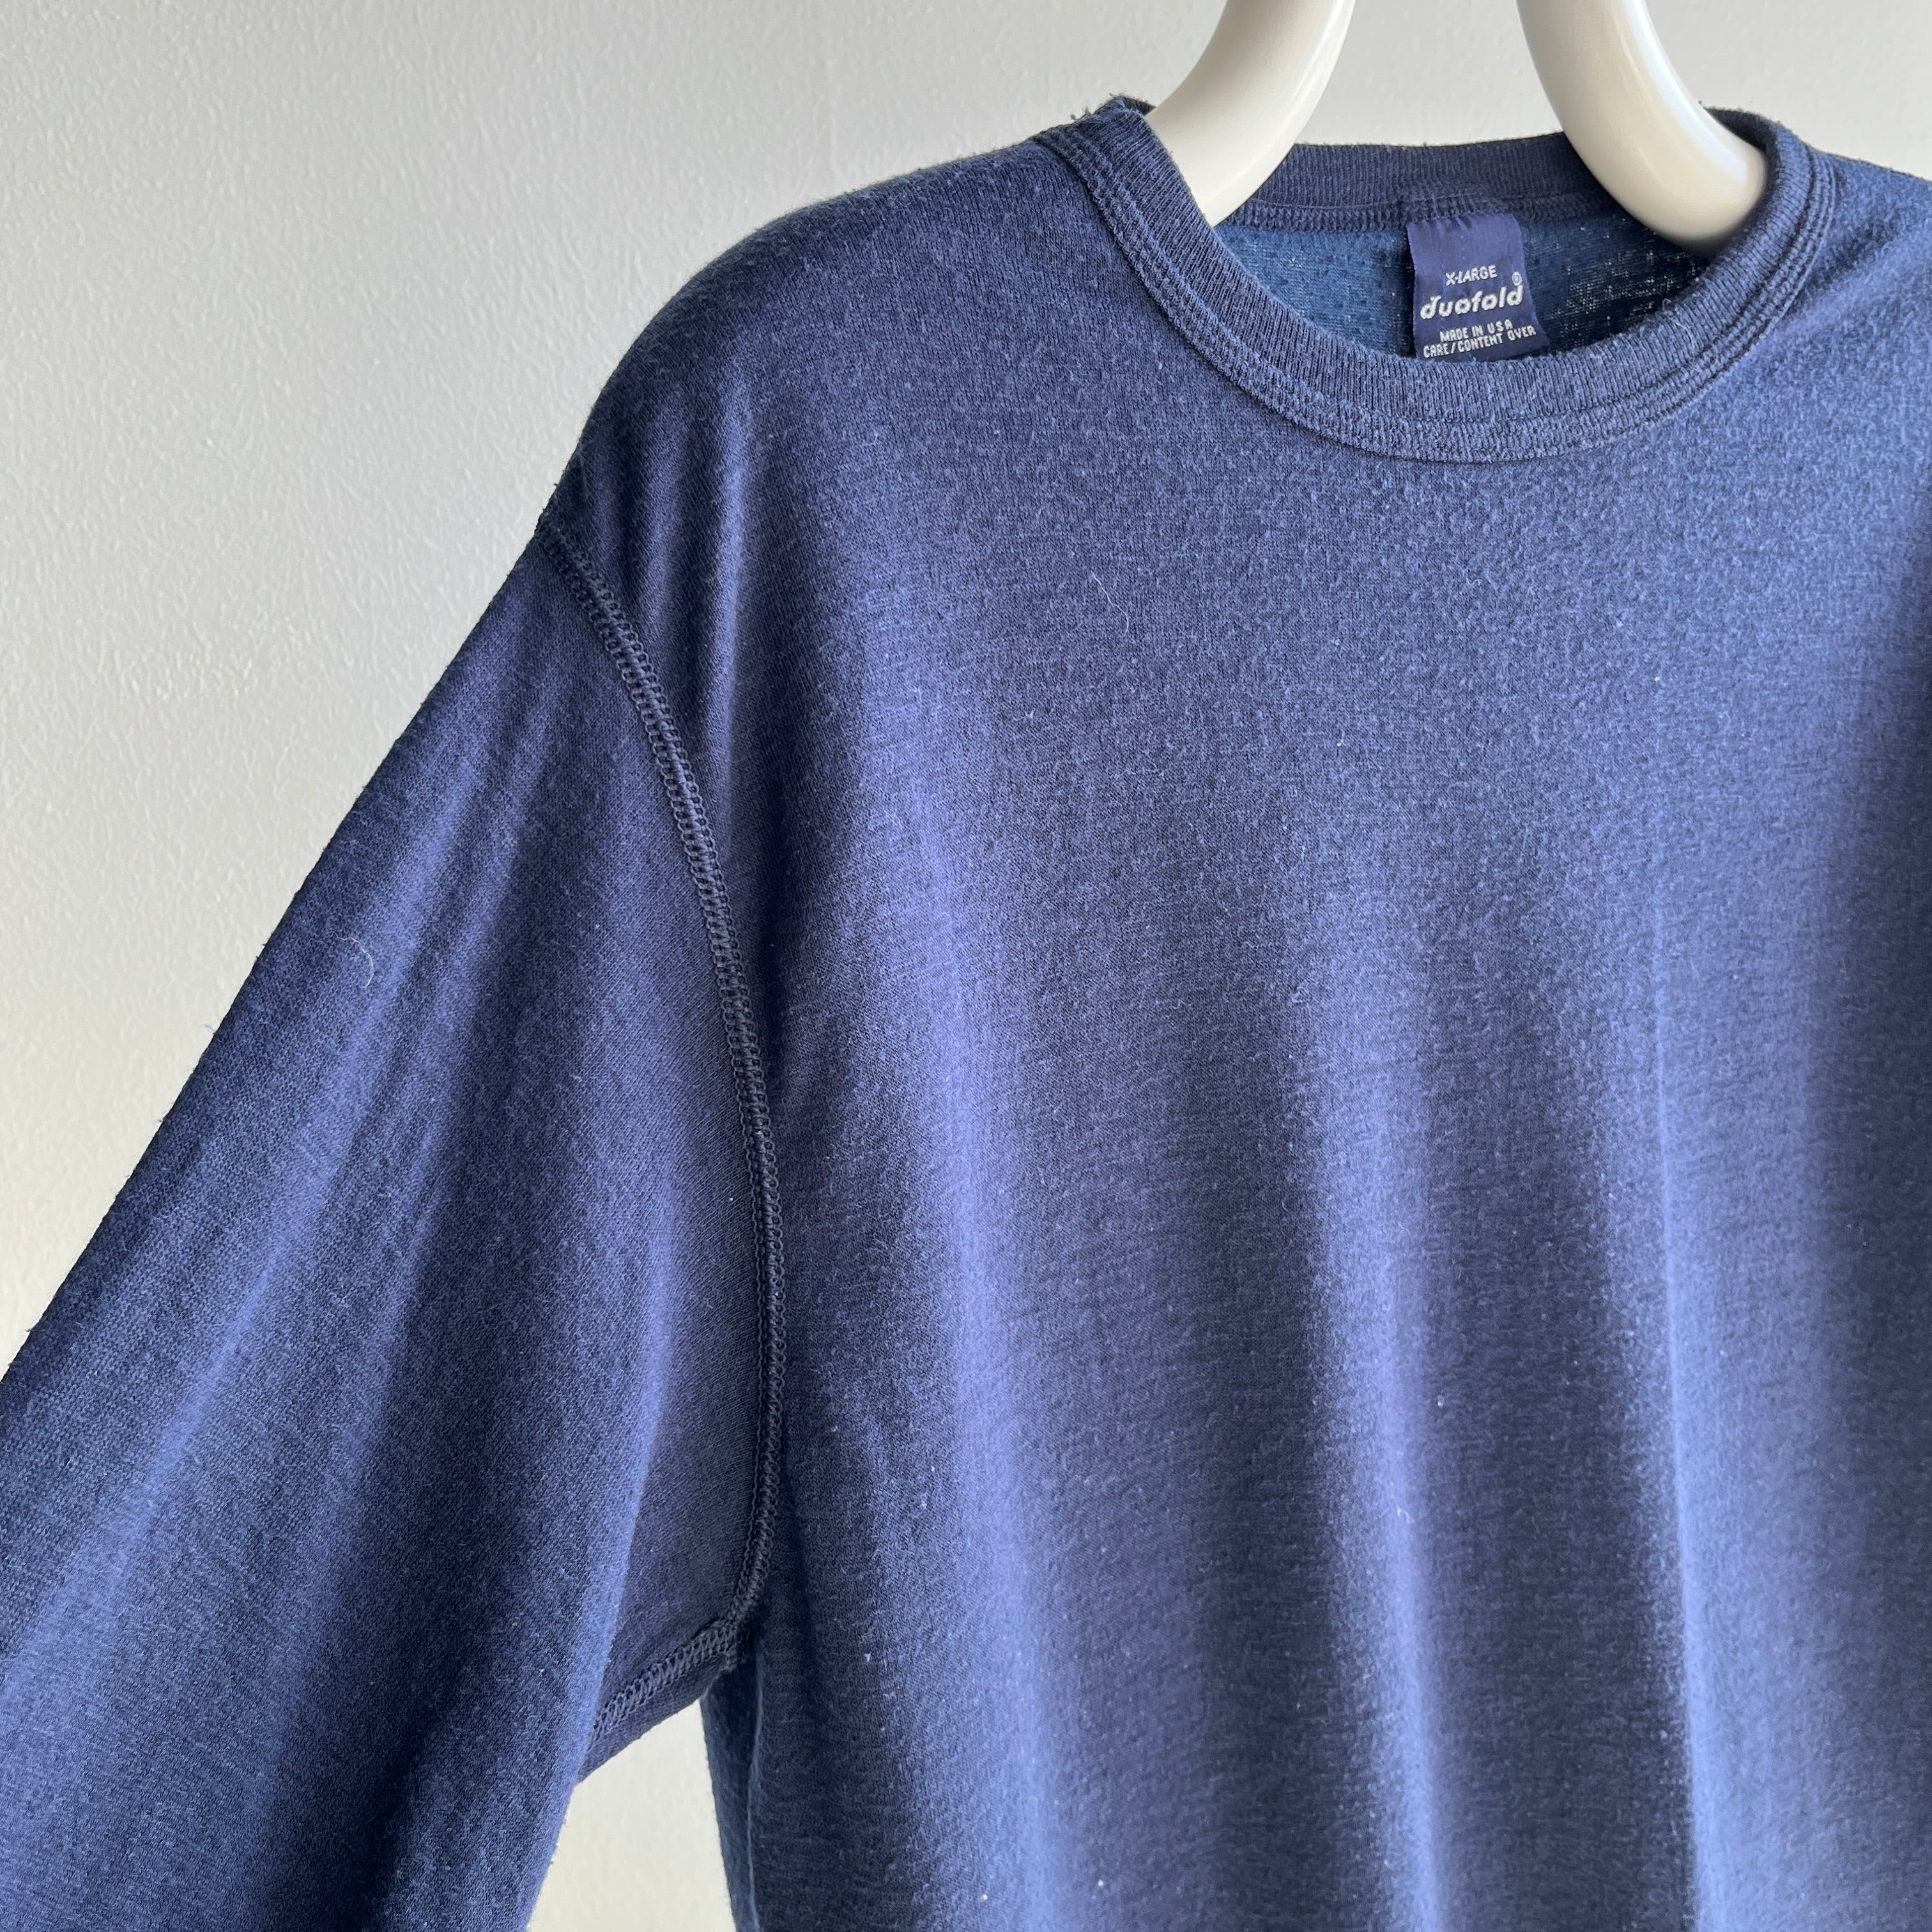 1980s Navy Duofold Super Soft Thermal